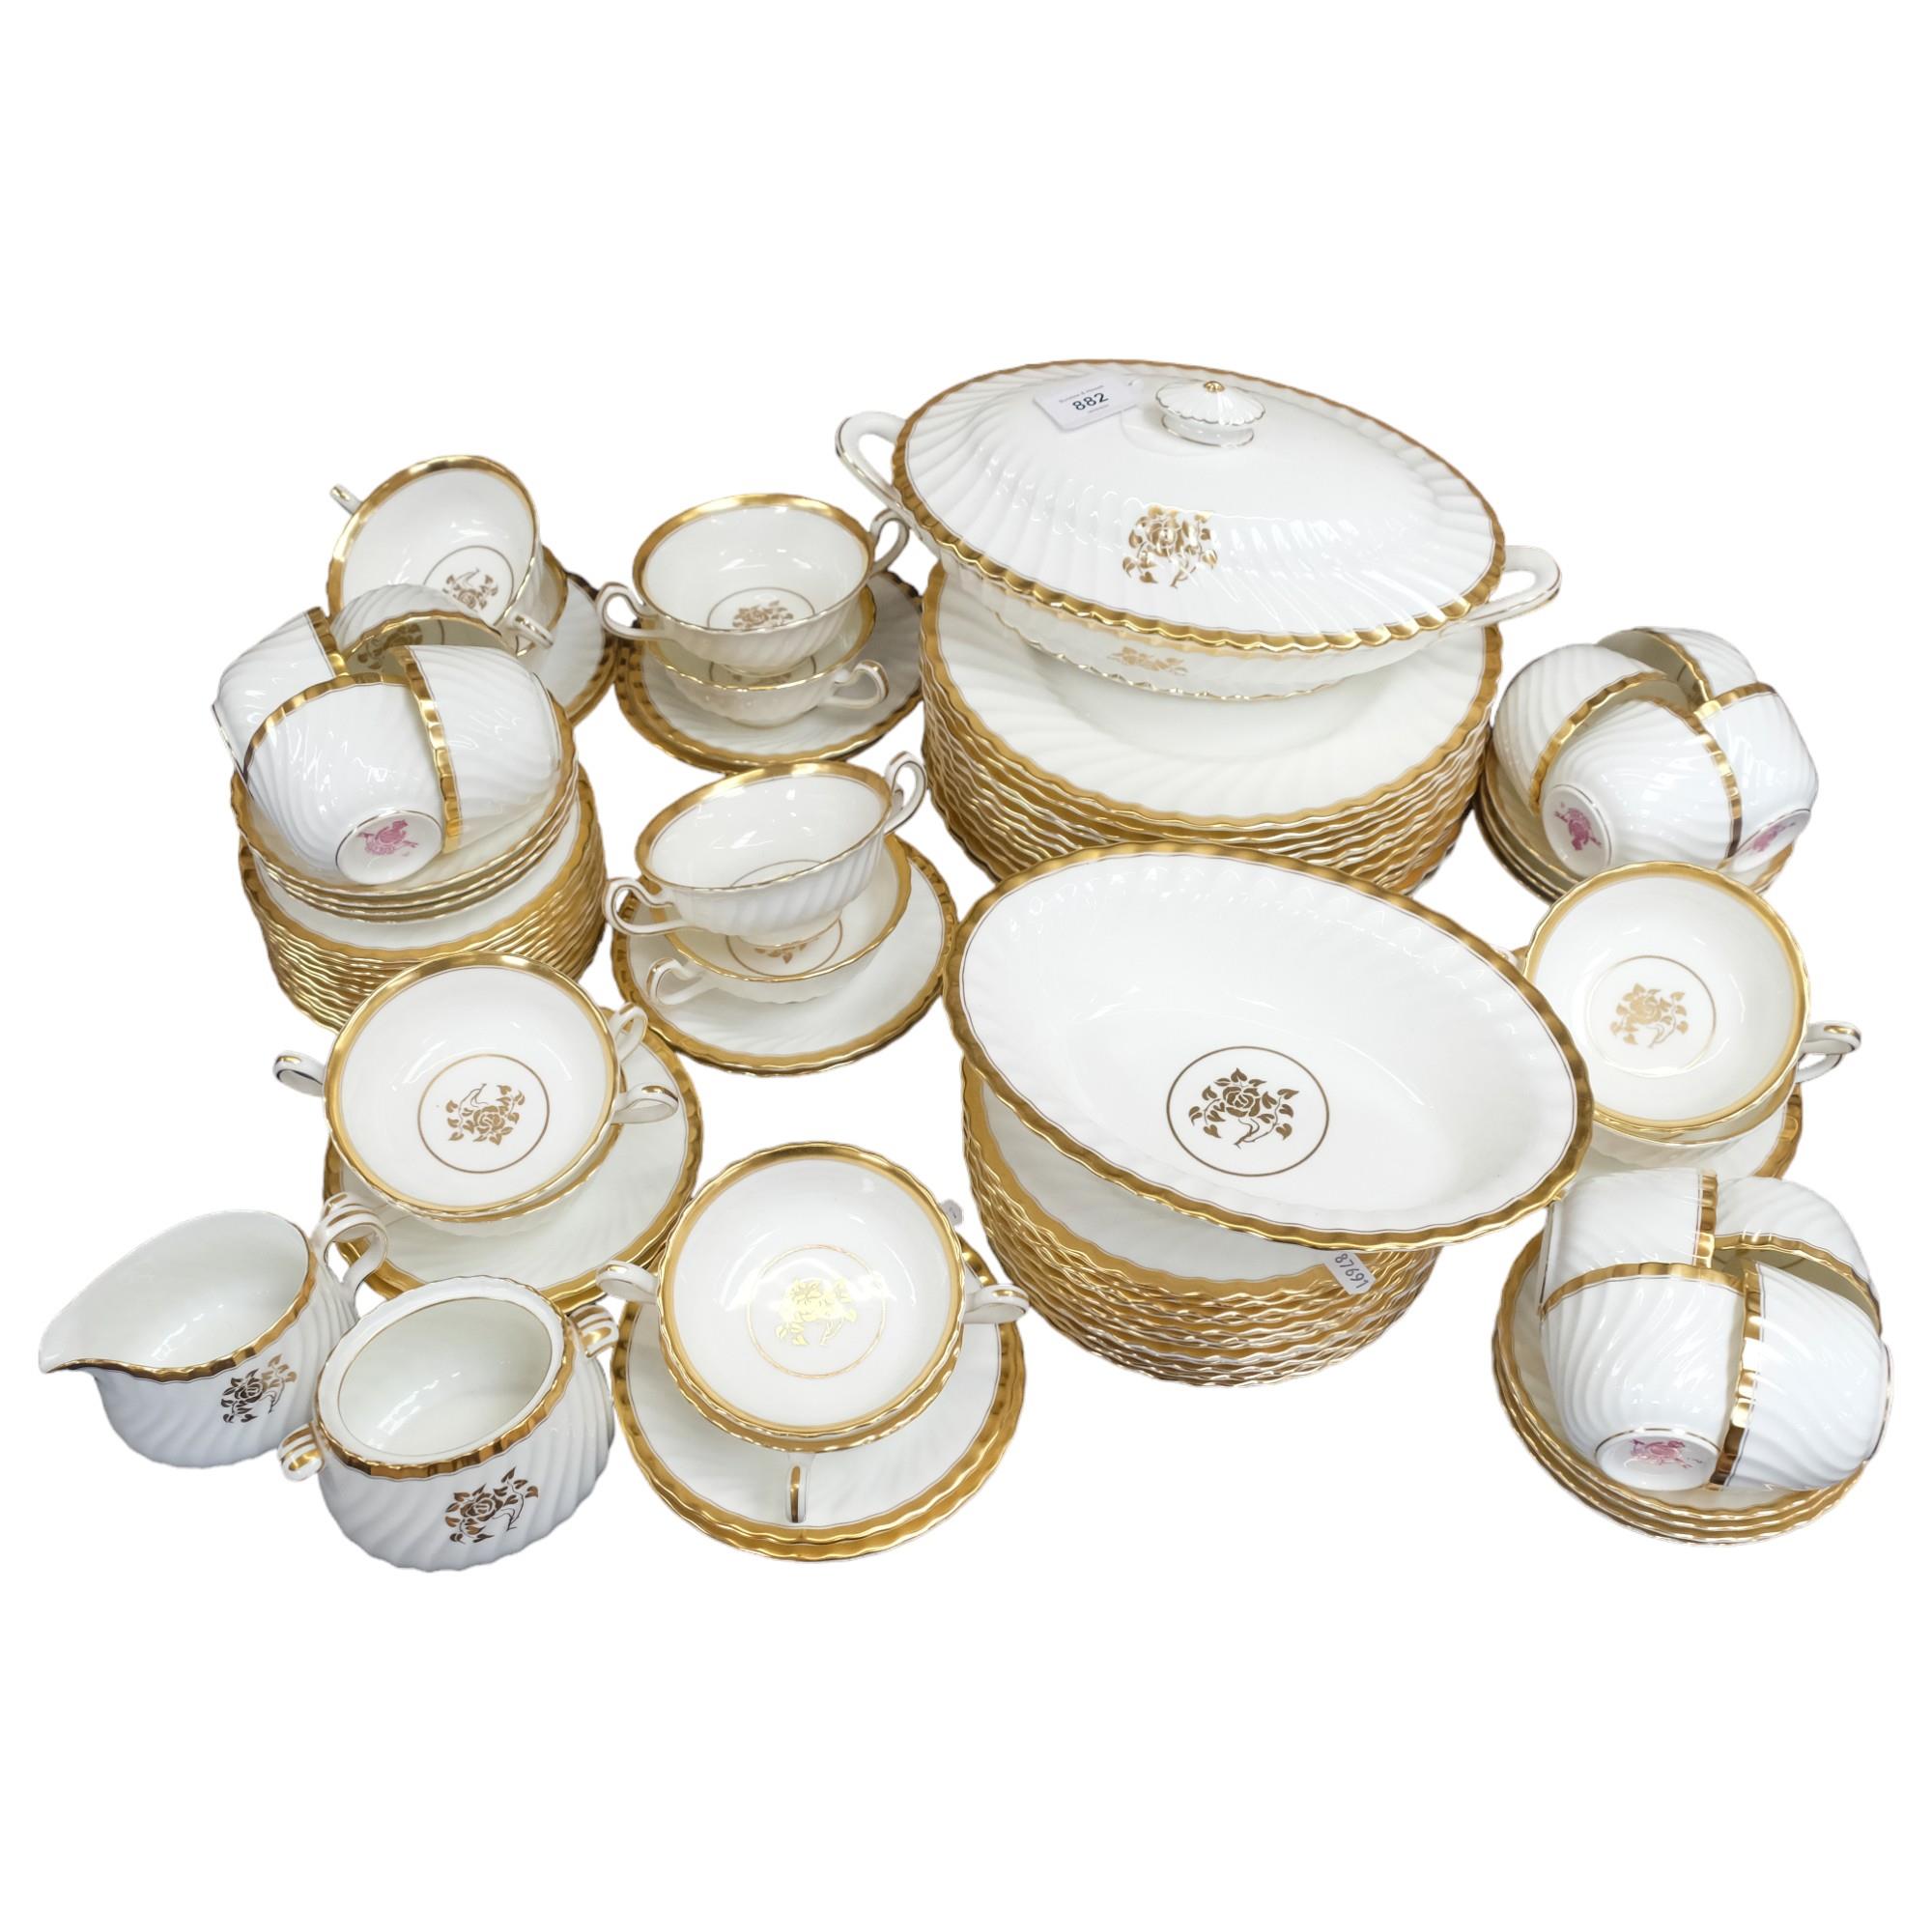 Minton's "Gold Rose" pattern dinner service for 12 people, including vegetable tureen and serving